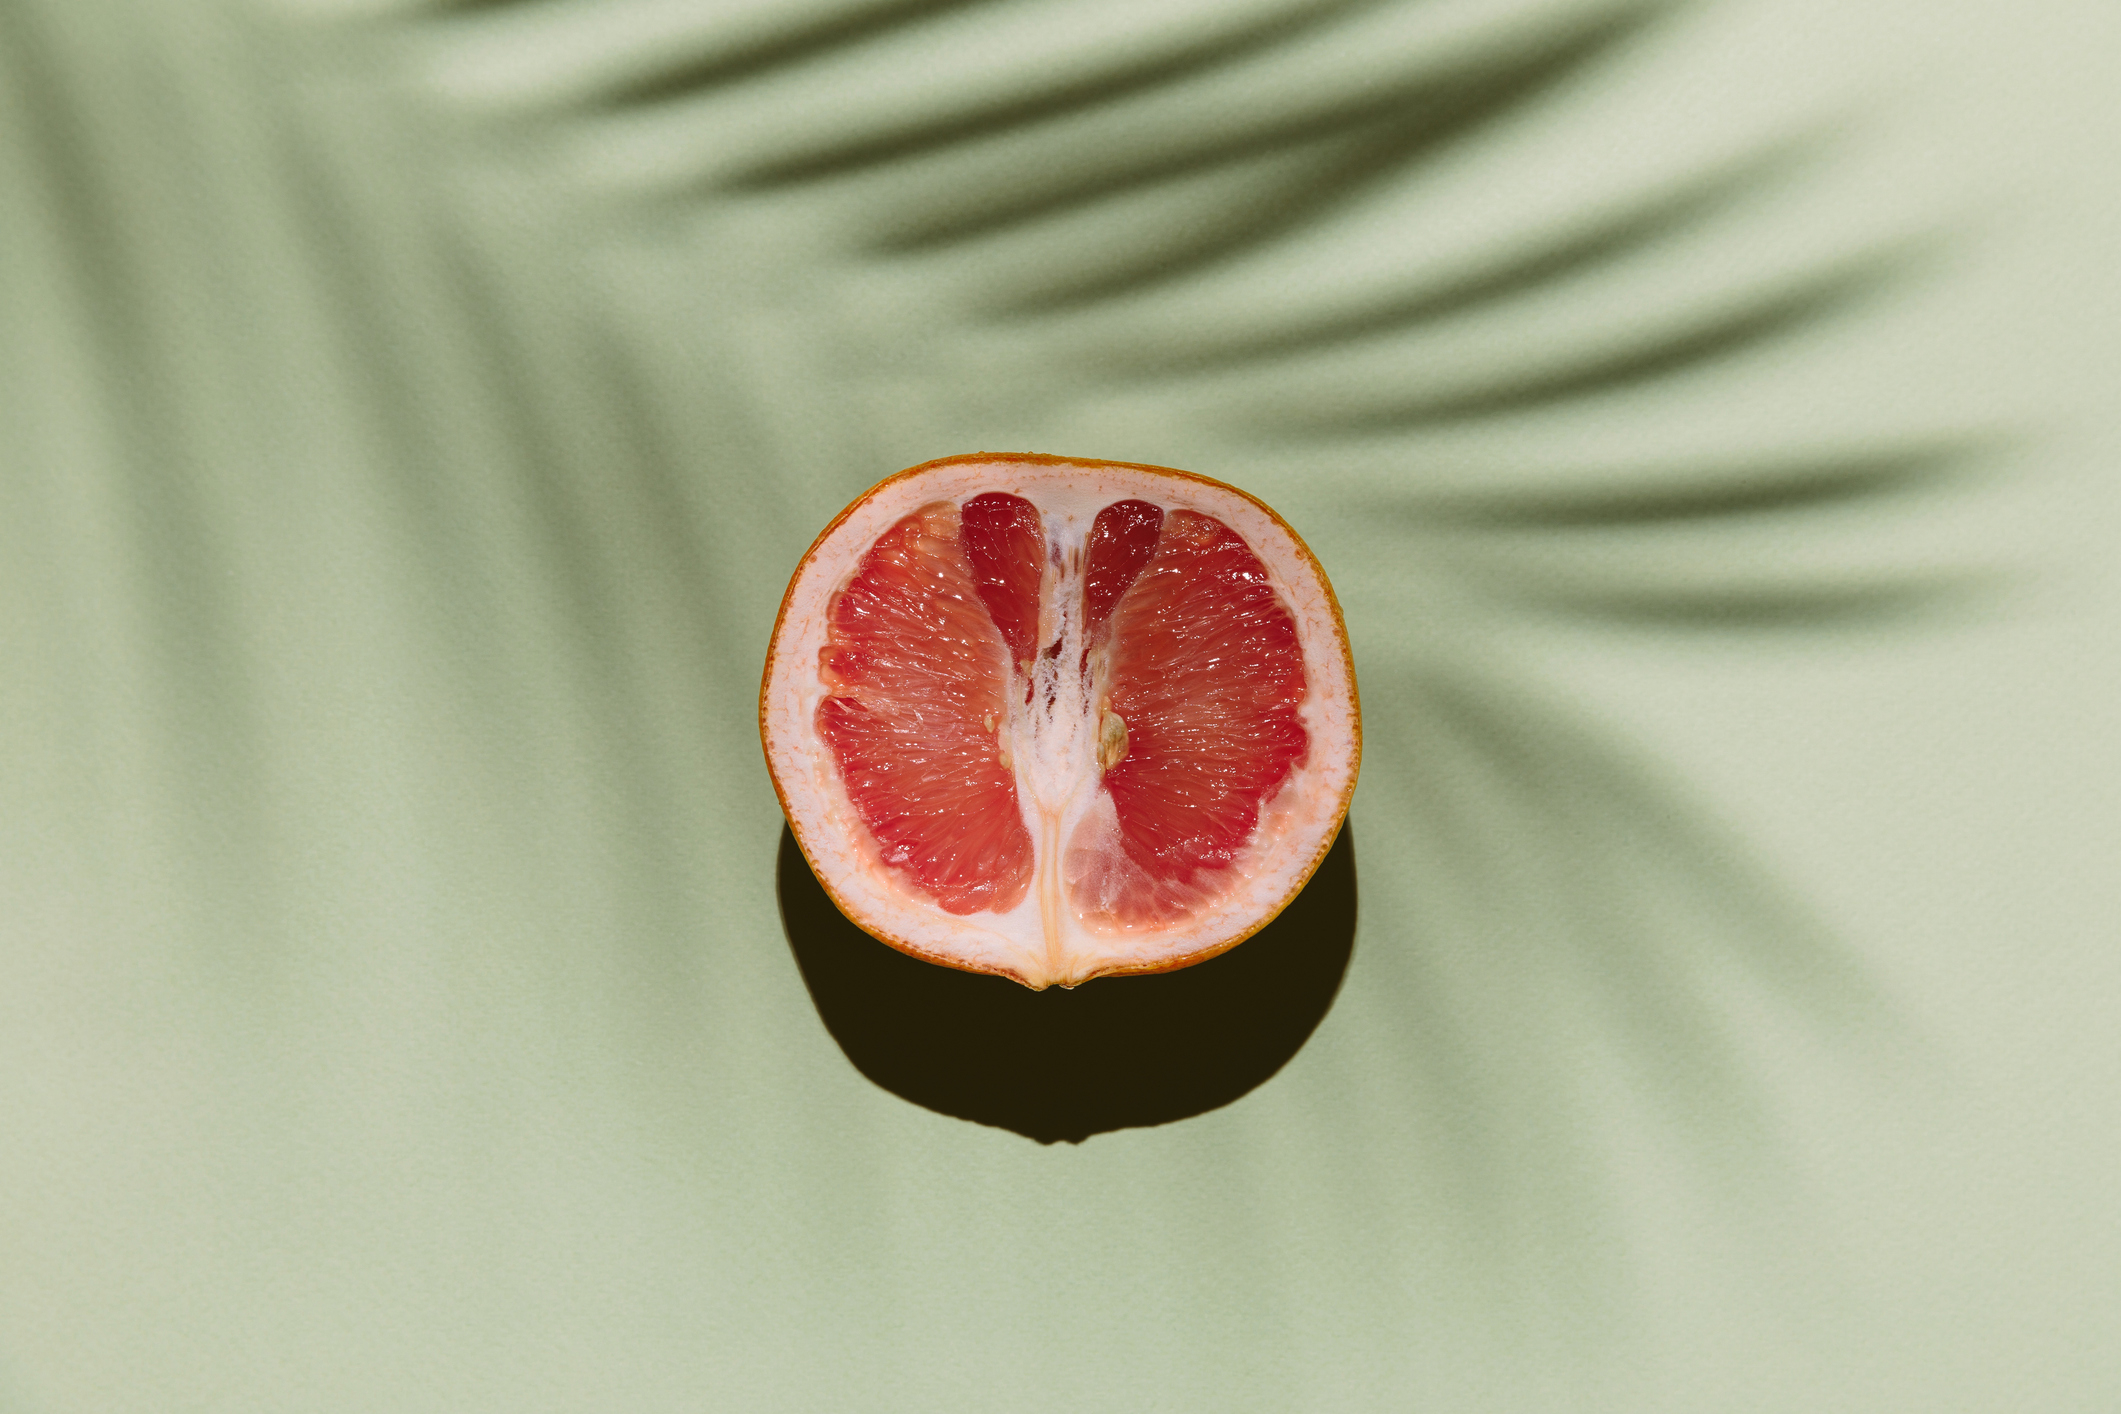 A halved grapefruit casting a shadow on a smooth surface with a palm leaf shadow in the background